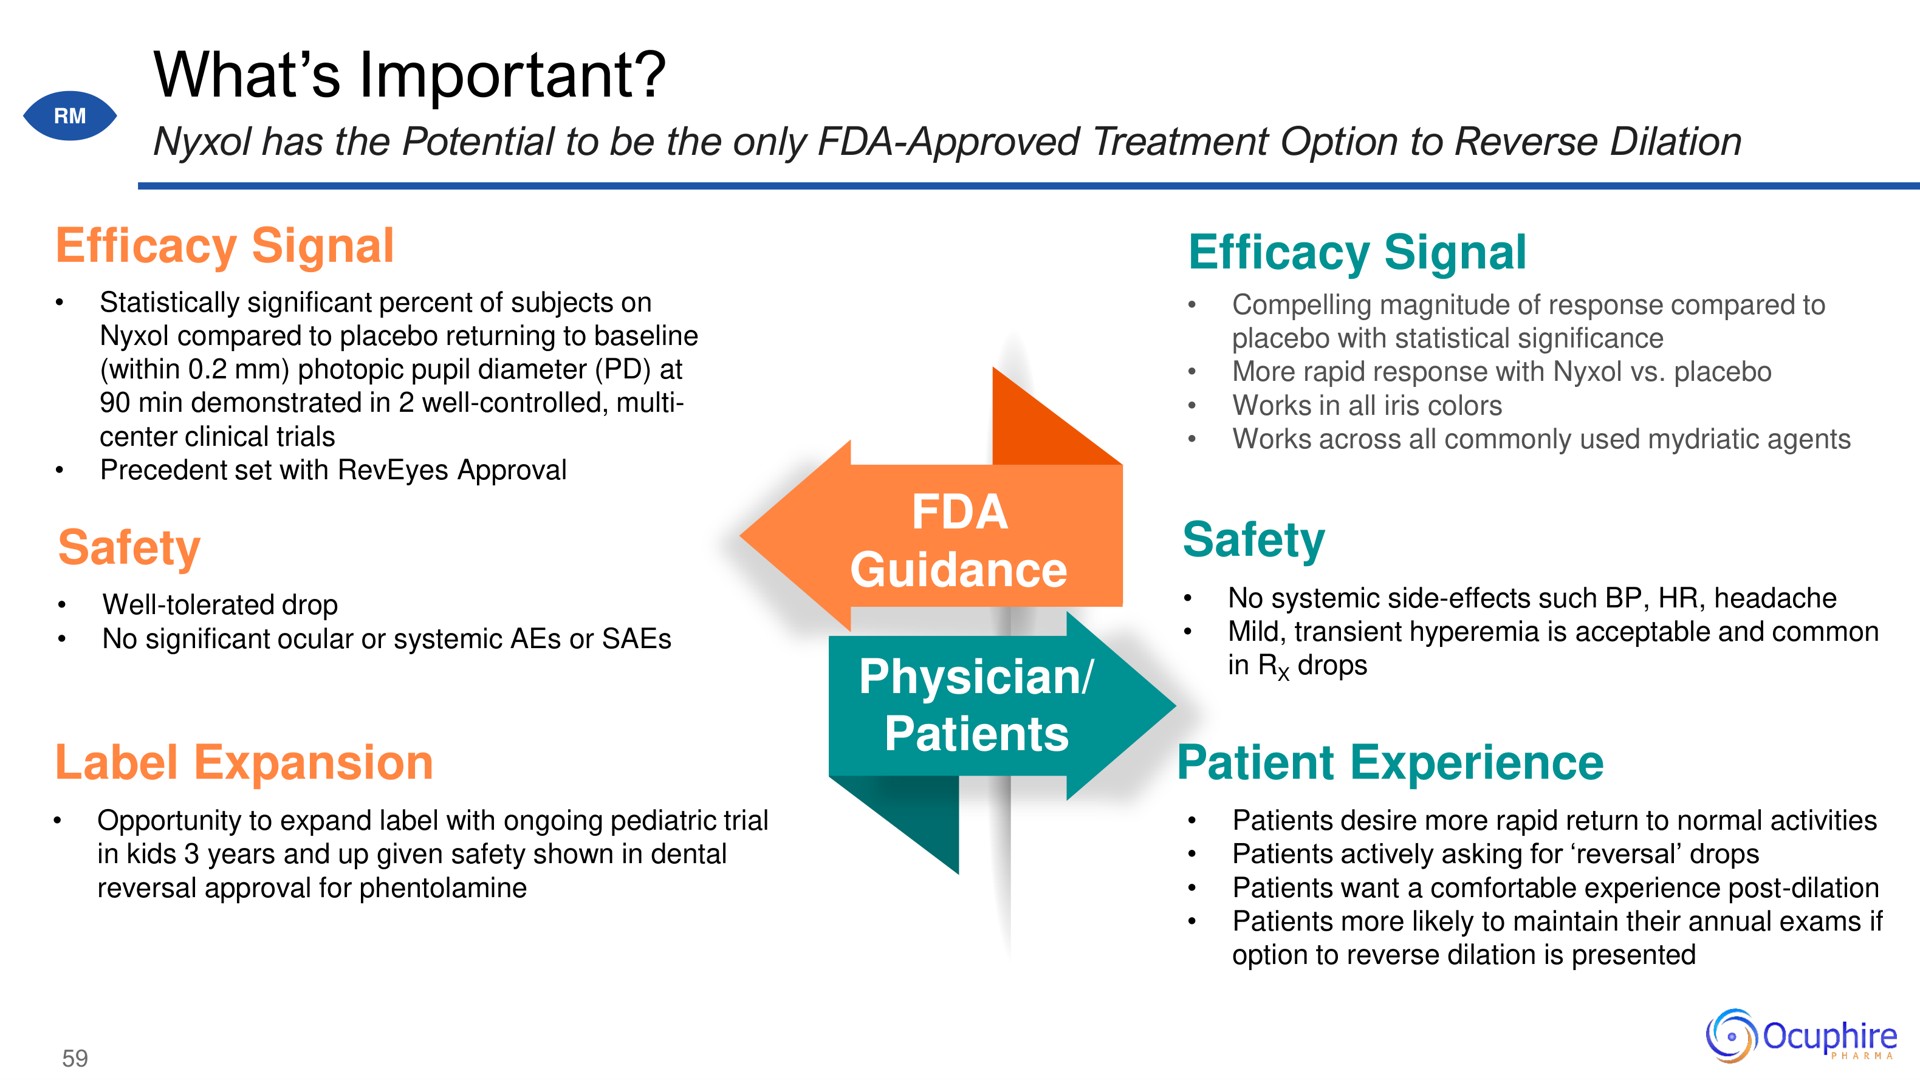 what important efficacy signal safety label expansion guidance physician patients efficacy signal safety patient experience in drops | Ocuphire Pharma